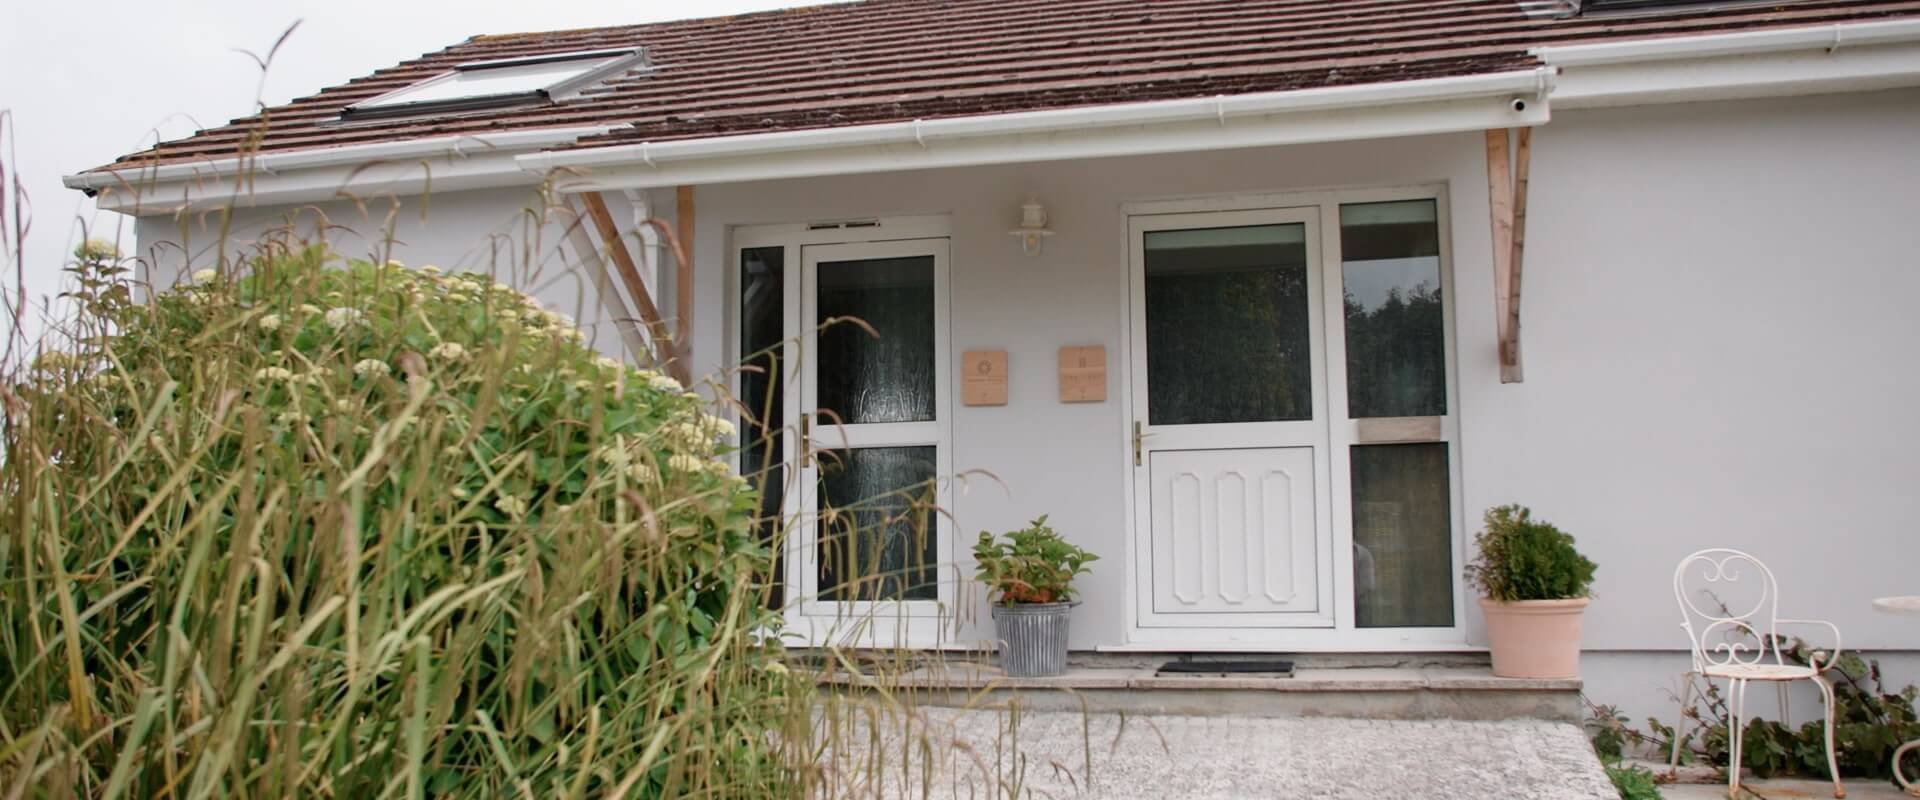 The front of the Bridal cottage at The Gate, Looe